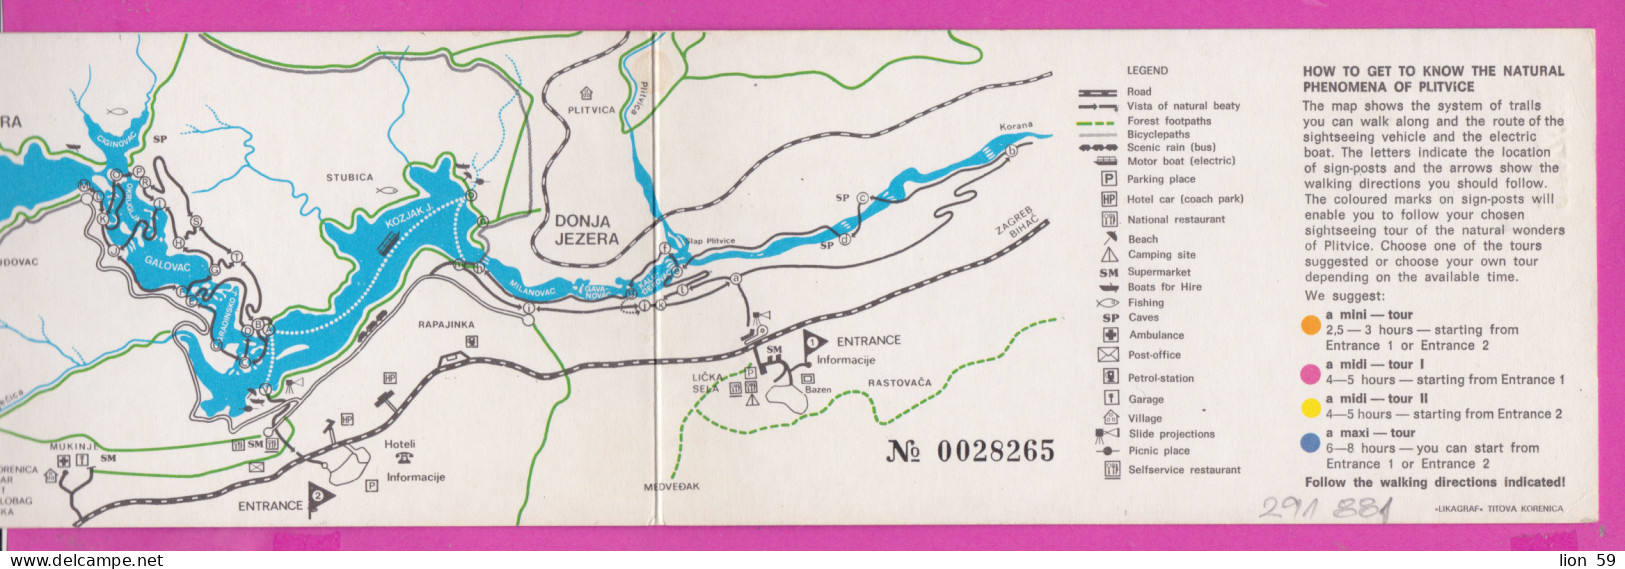 291881 / Croatia Plitvice Lakes Nat Park Price Ticket Includes A-1 Way Trip With A Sight Seeing Vehicle An Electric Boat - Europe